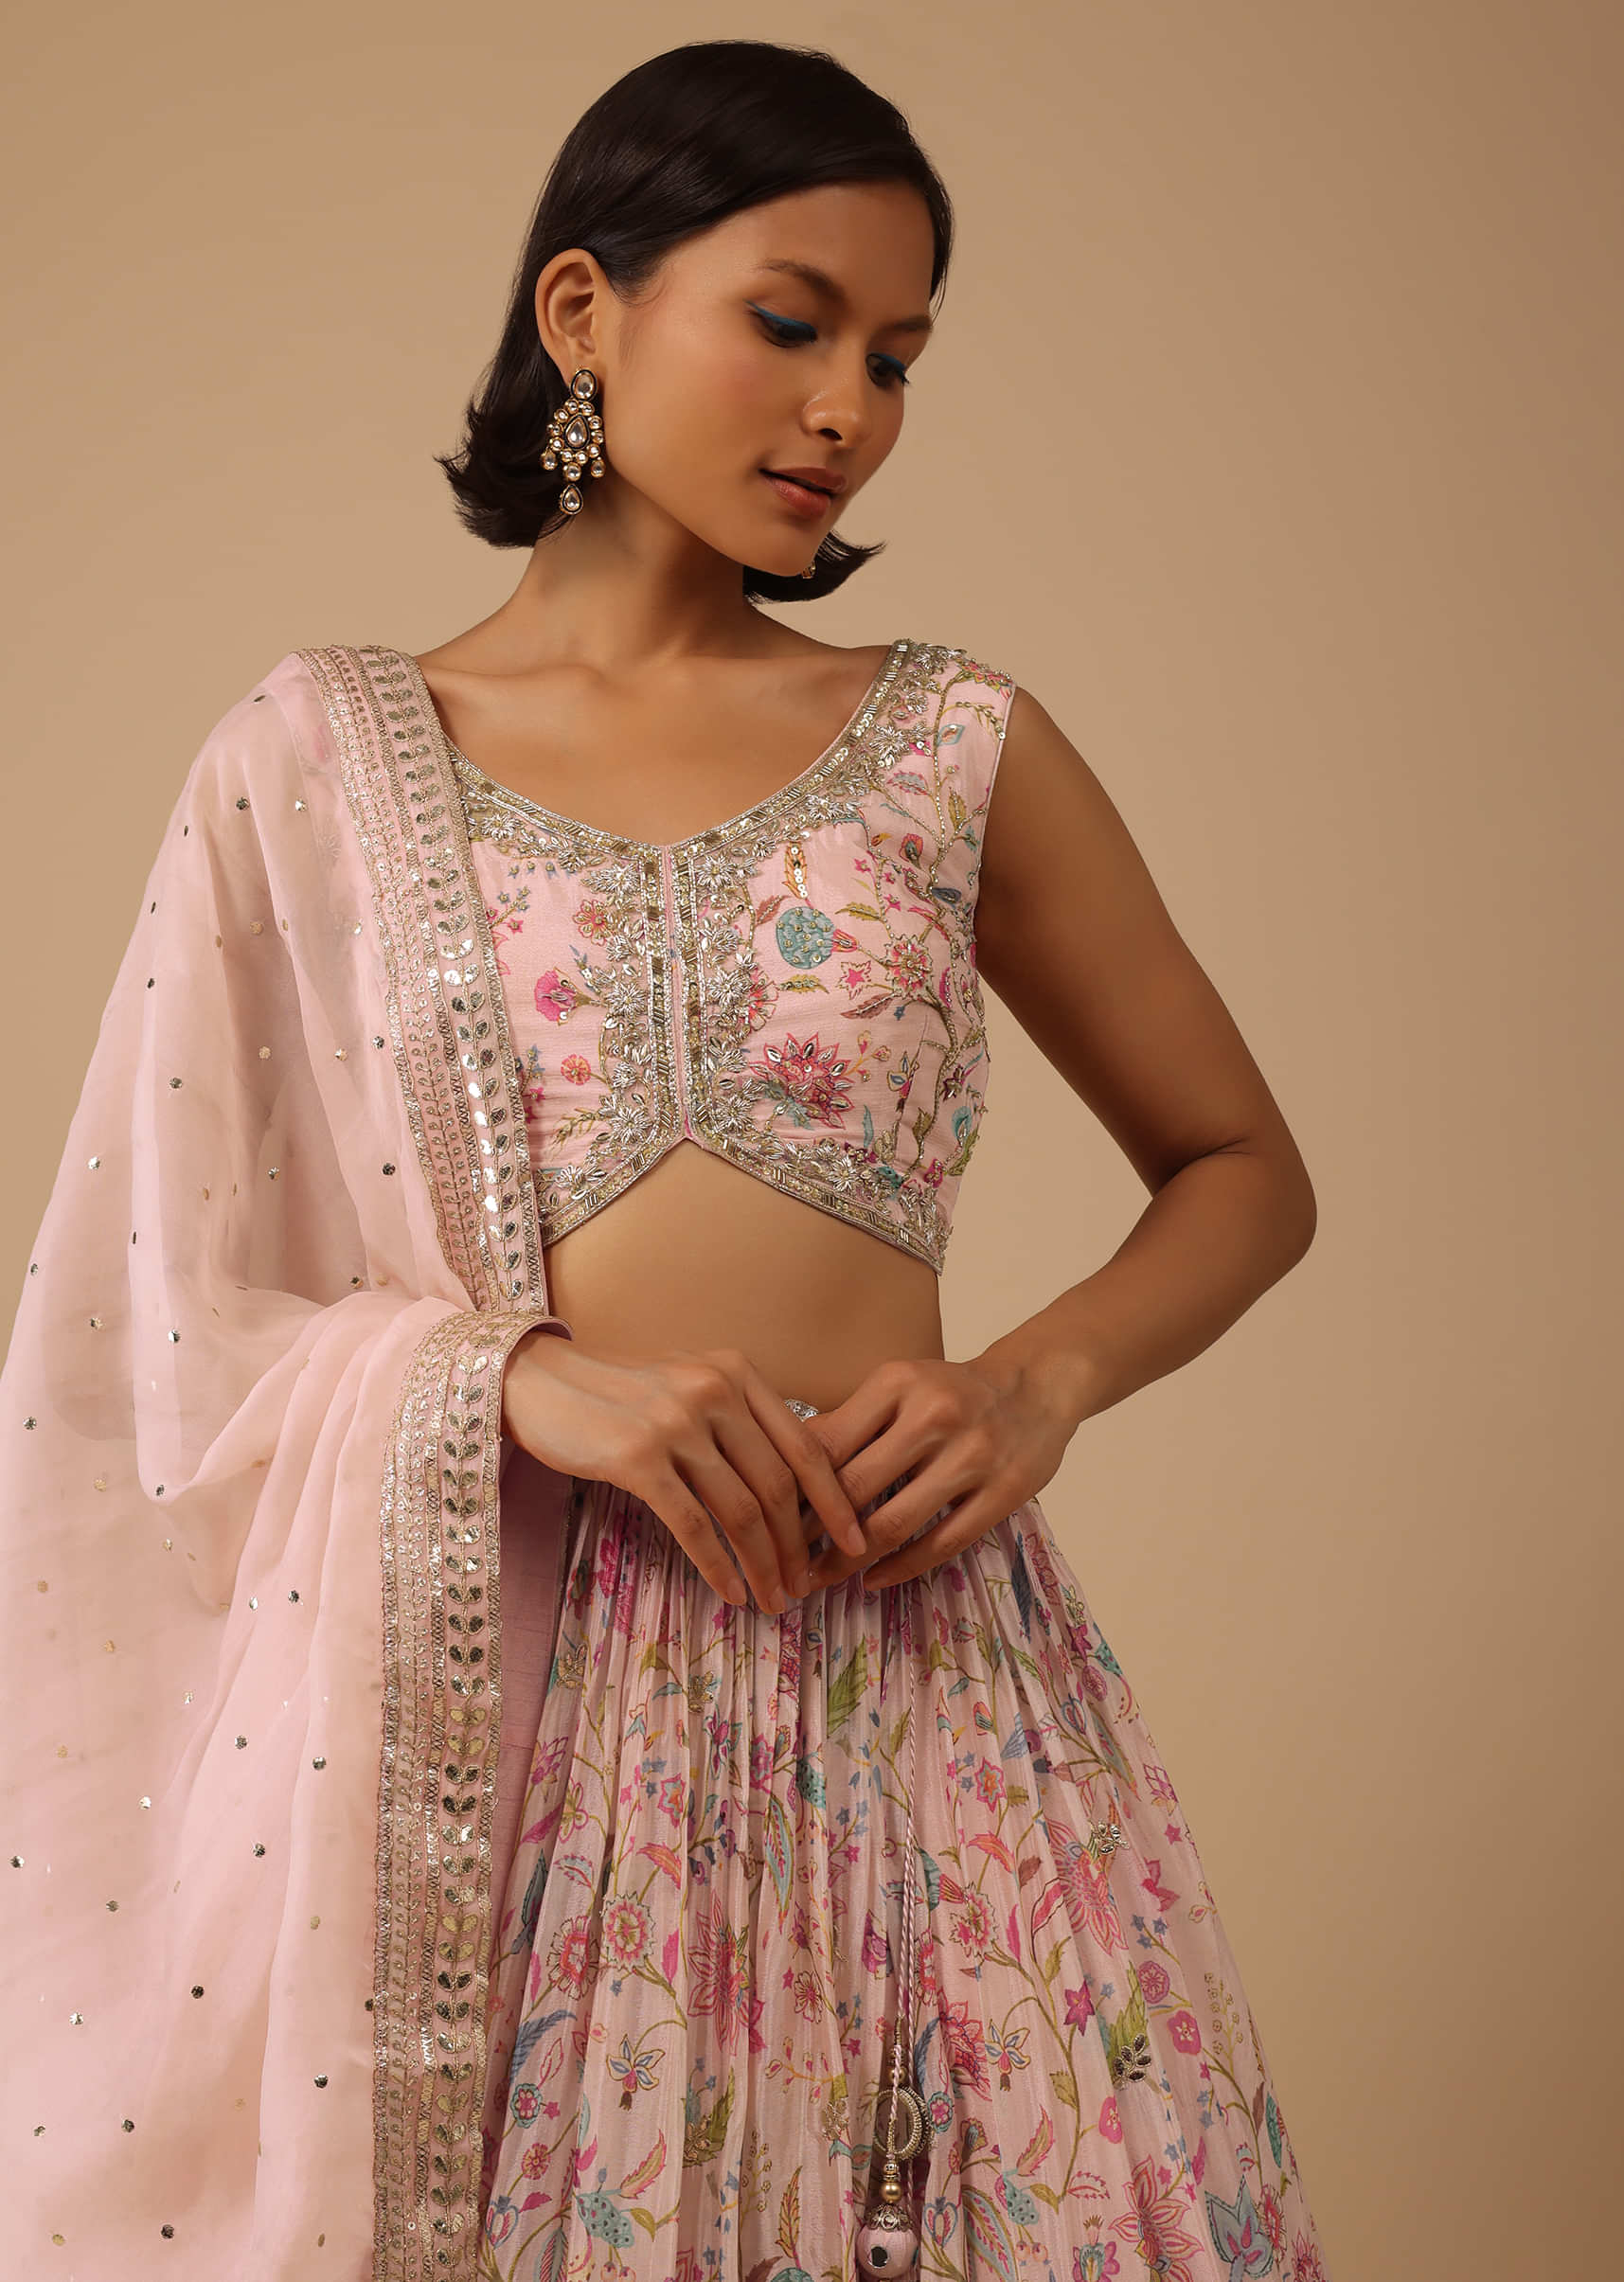 Powder Pink Lehenga Set In Chinon With Floral Print And Gota Work On The Hem